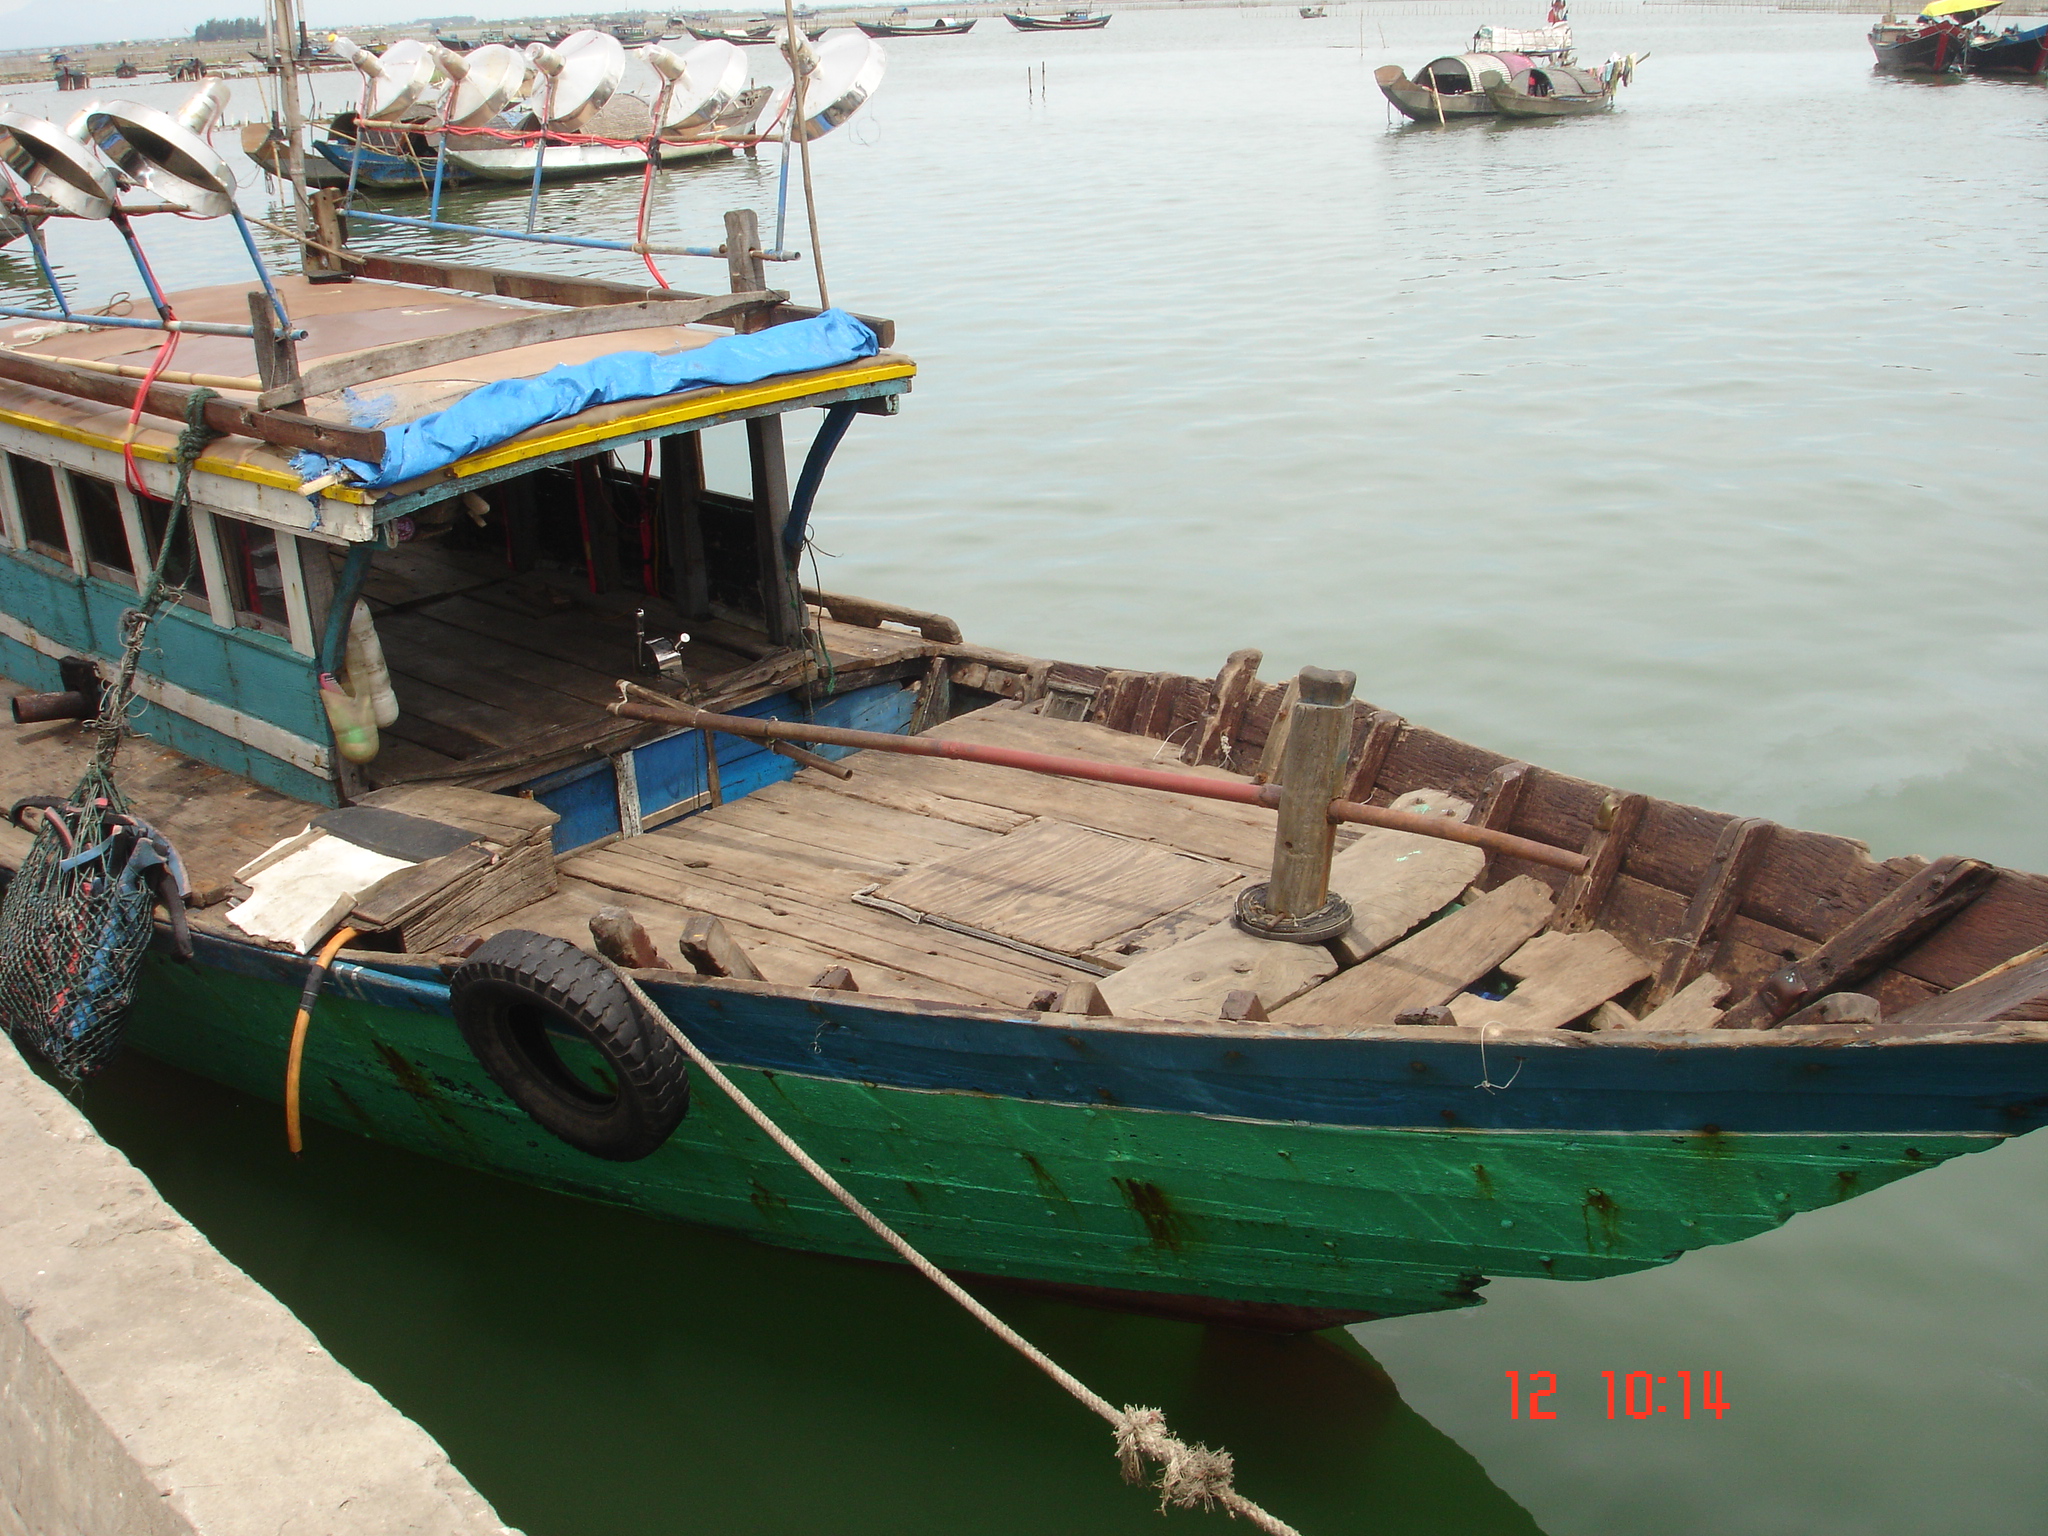 Solutions to reduce illegal fishing vessels